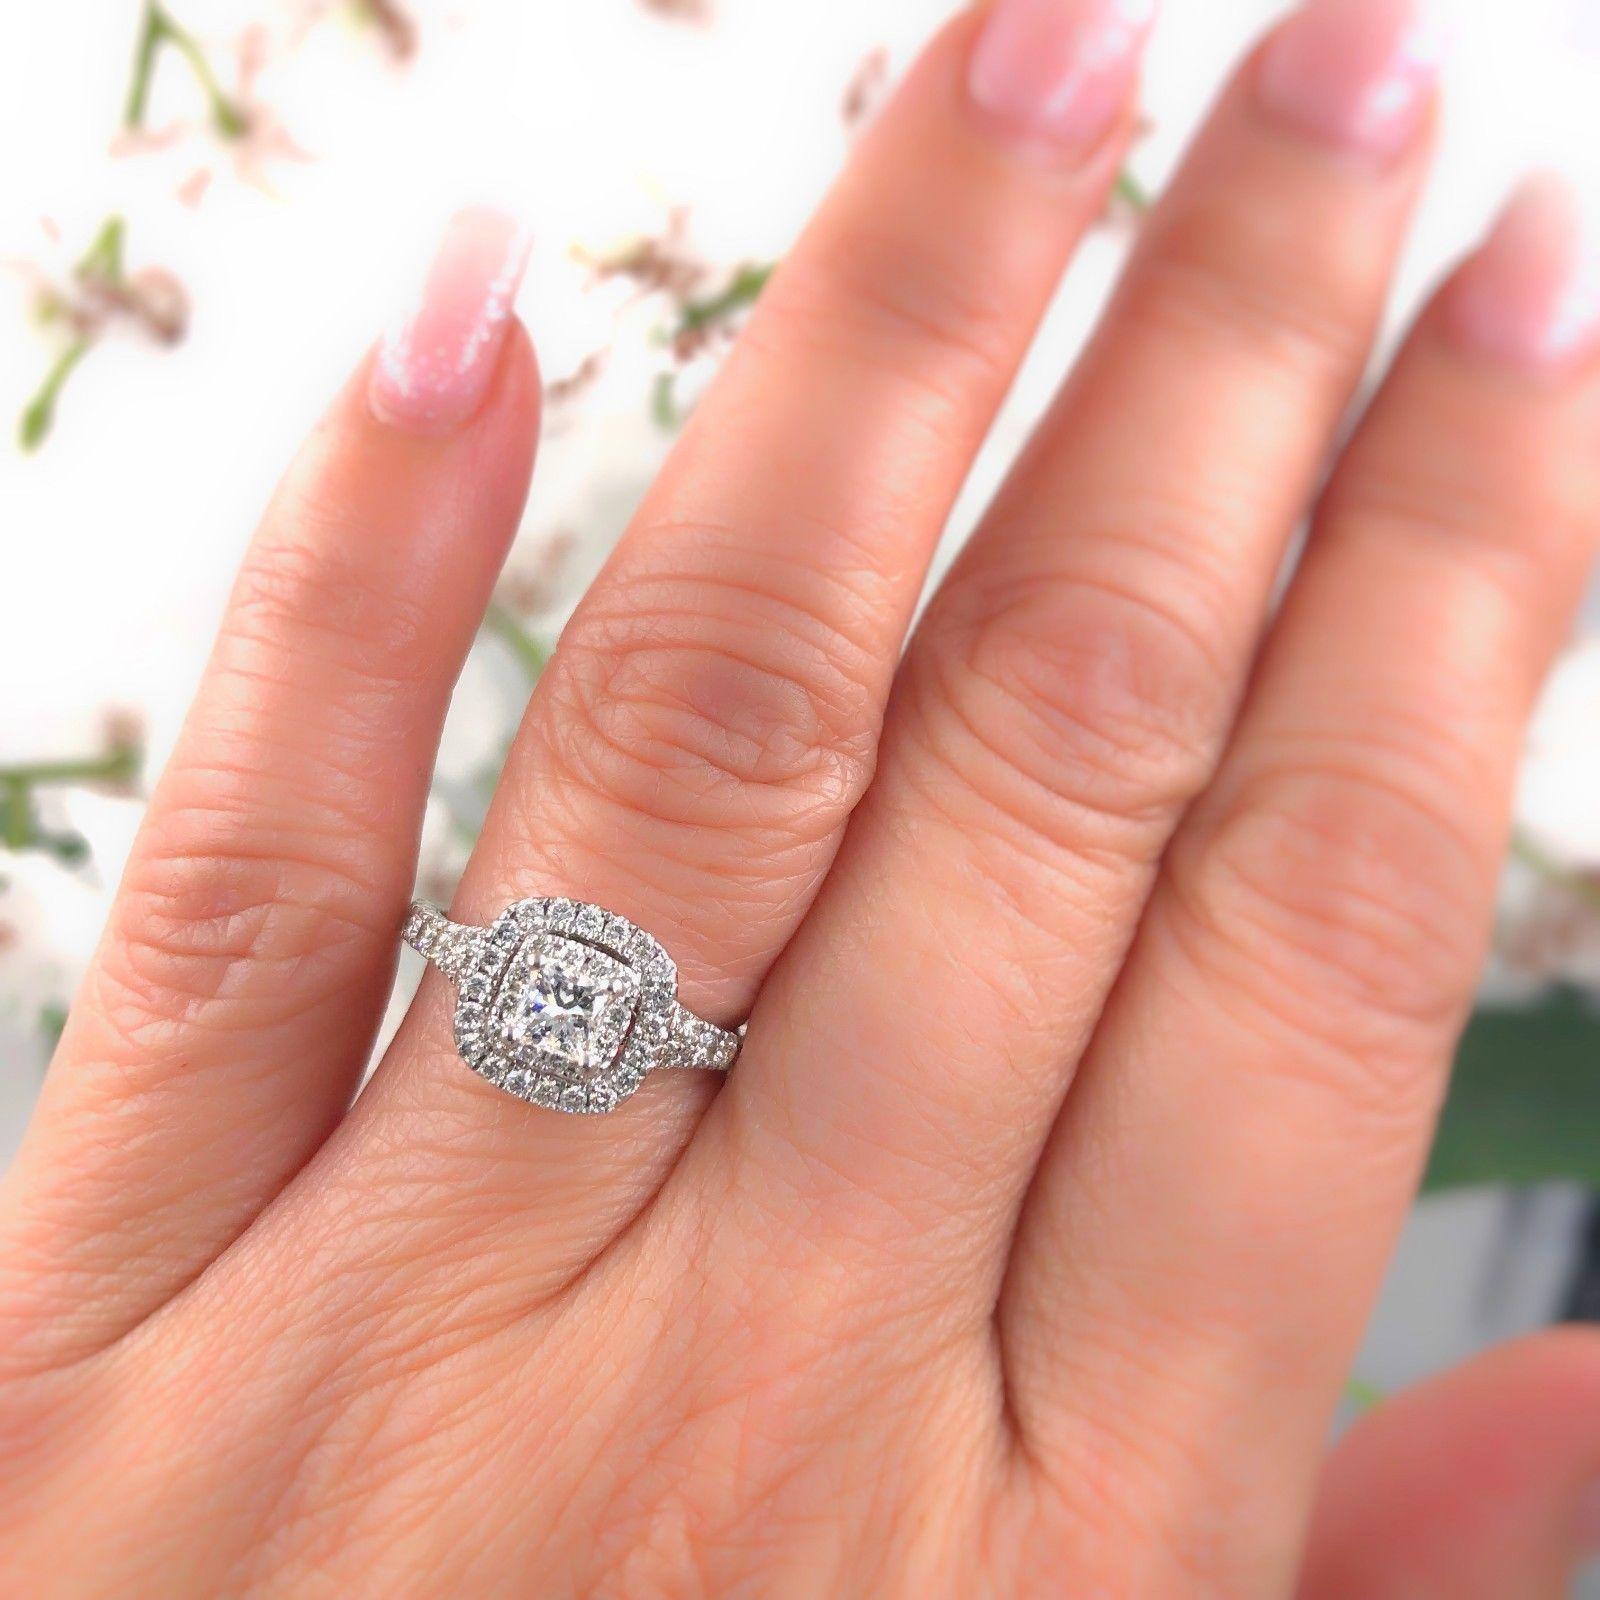 Neil Lane Bridal 
Style:  Double Halo Diamond Engagement Ring
Stock Number:  #940241514
Metal:  14k White Gold
Size:  5.5  - sizable
Total Carat Weight:  1.00 tcw
Diamond Shape:  Princess 0.33 cts 
Diamond Color & Clarity:  I / I1
Accent Diamonds: 